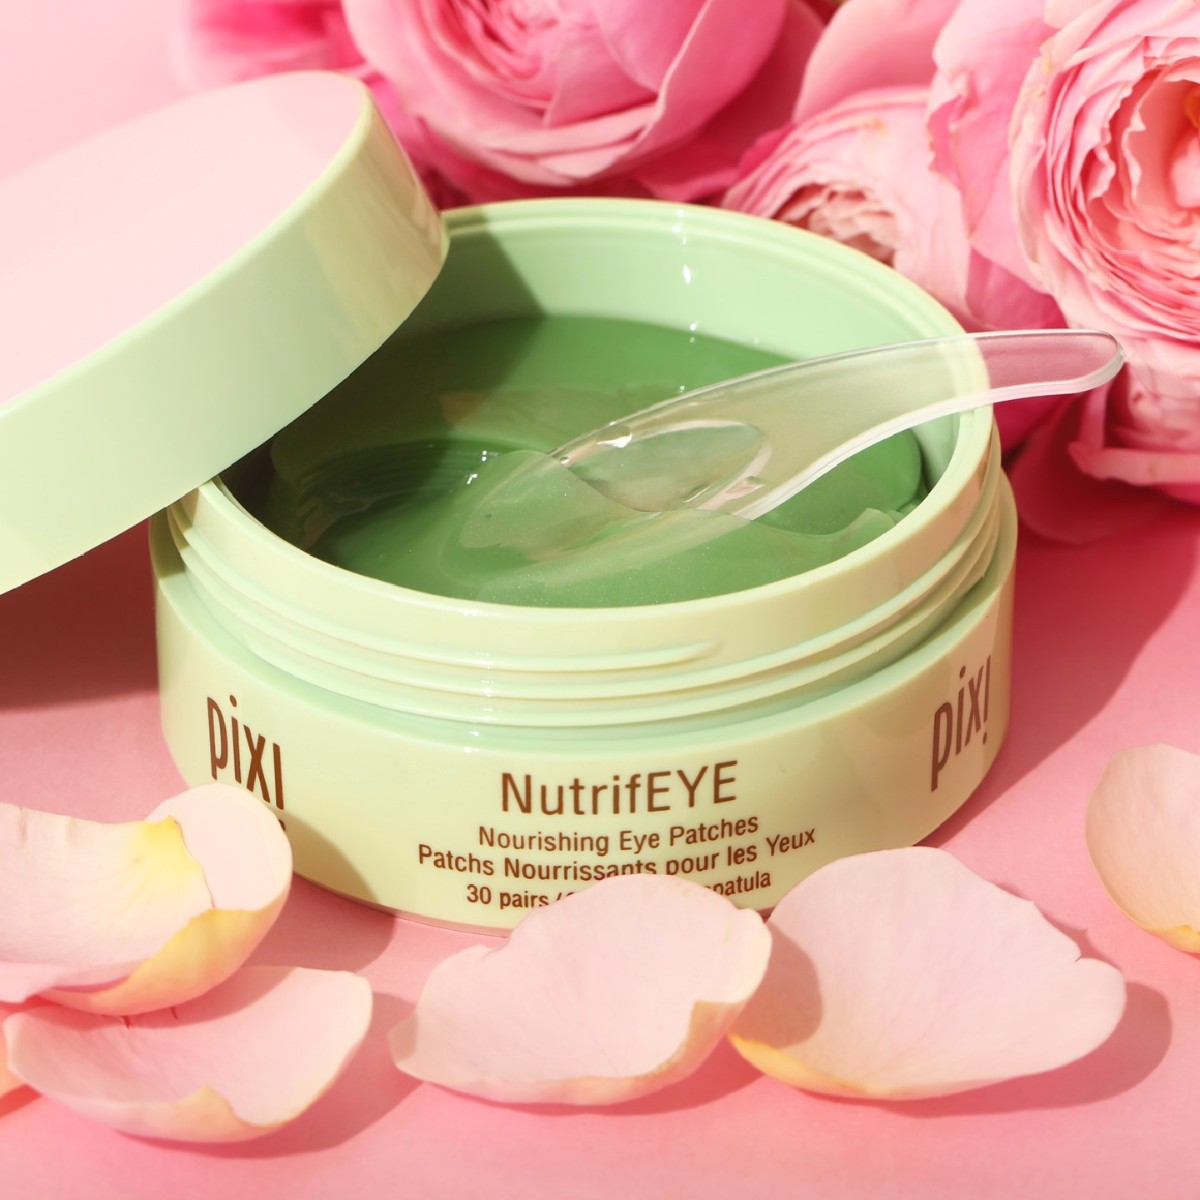 Steeped in a #PixiPerfect serum formula, NutrifEYE nourishes, tones and deeply hydrates the sensitive under-eyes, leaving you feeling fresh-faced and radiant! Created with below ingredients: 💖 Rose Flower Extract 💖 Aloe Vera 💖 Chamomile #PixiBeauty #Skintreats #EyePatches